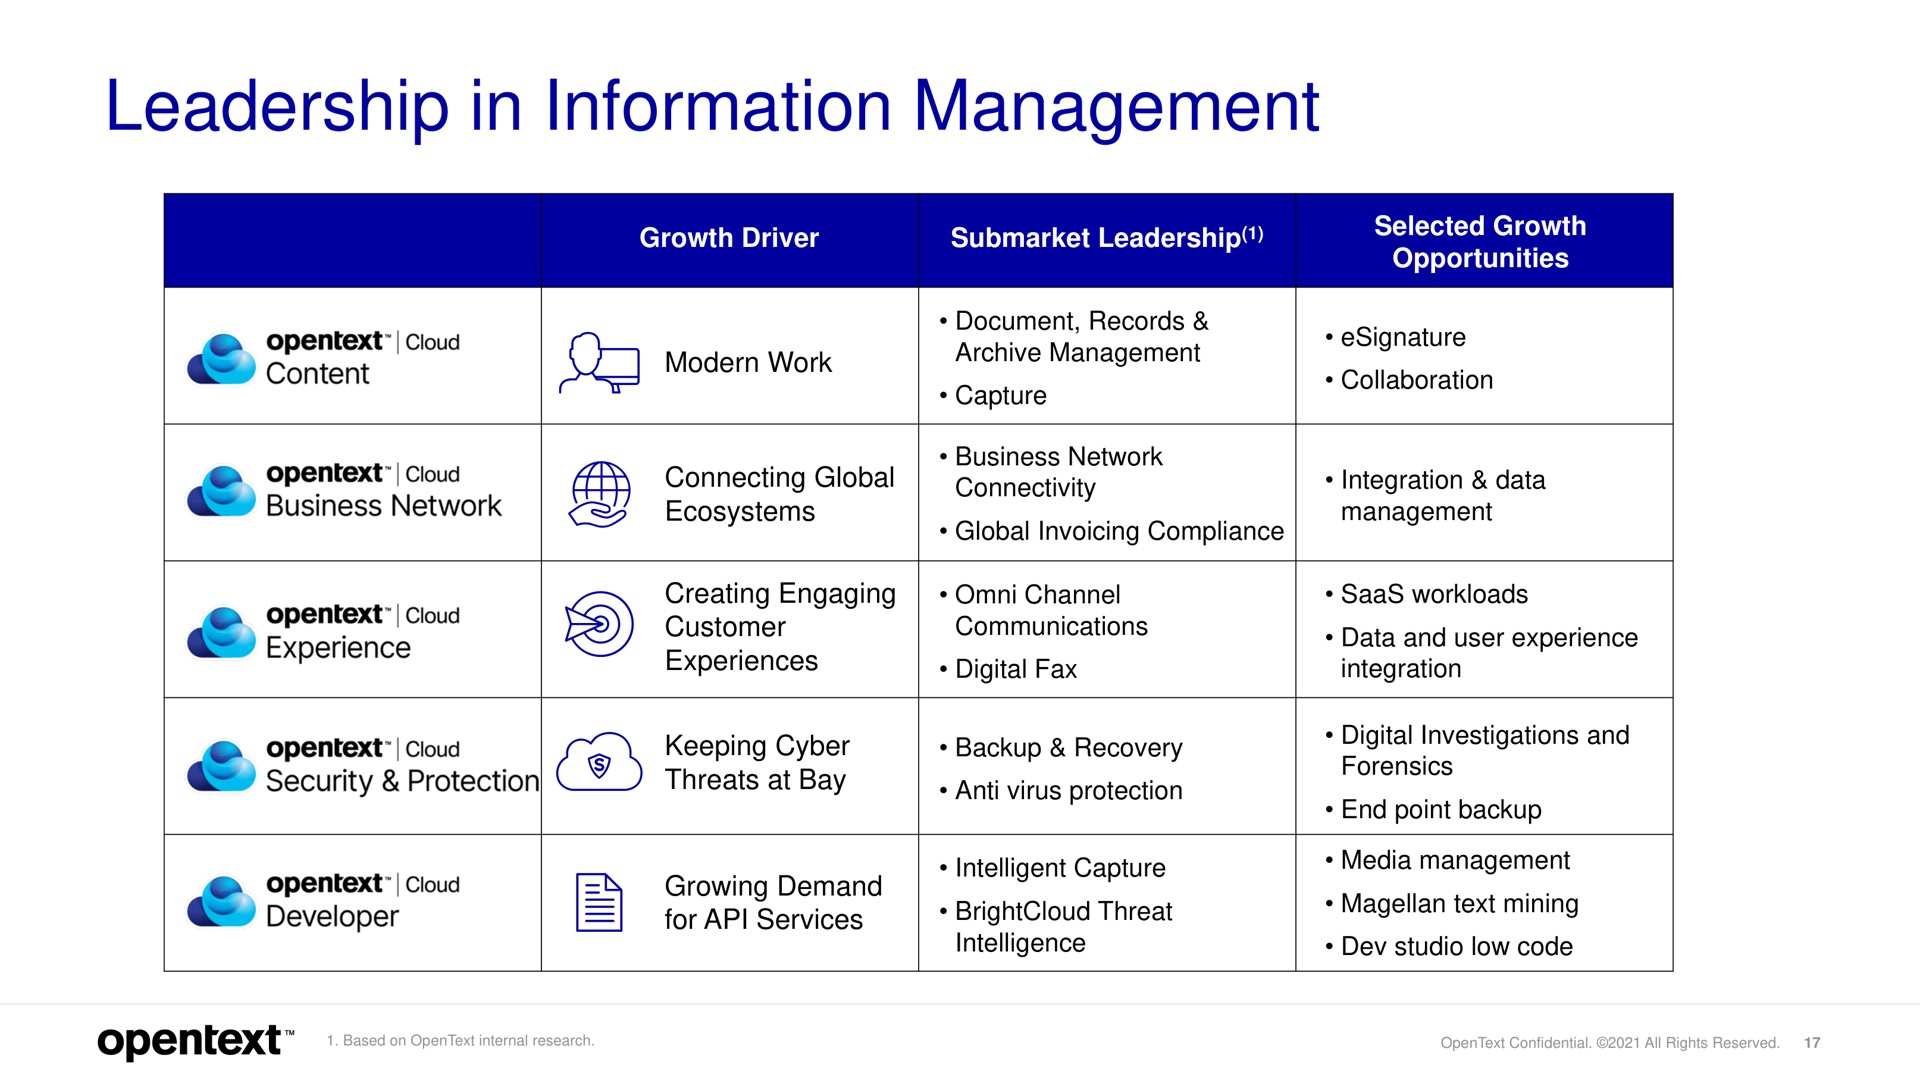 leadership in information management | OpenText